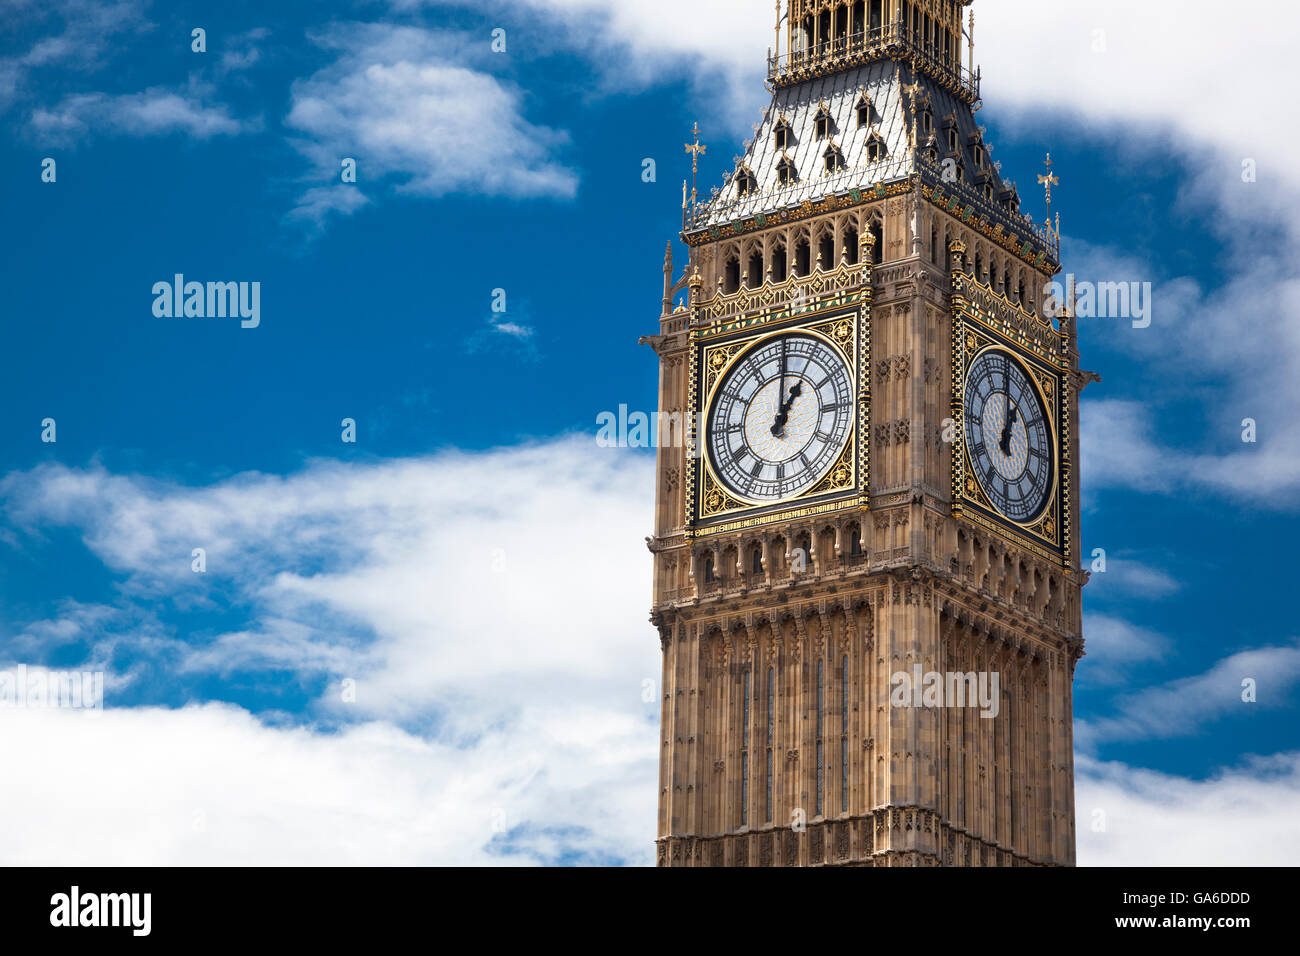 Close-up of Big Ben - most recognizable landmark in London, England Stock Photo